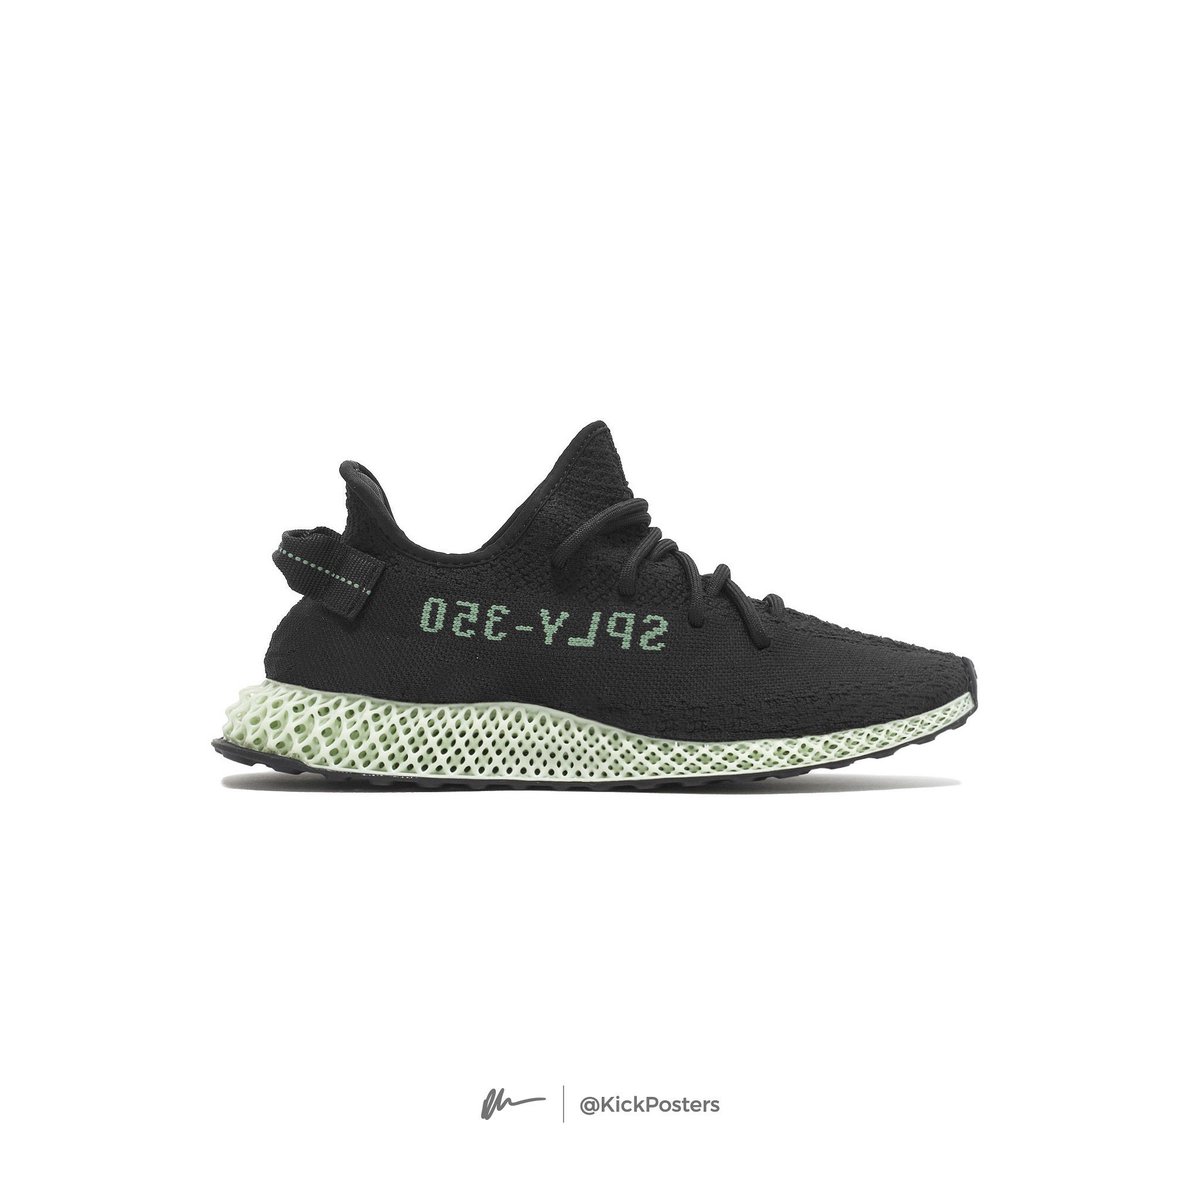 Would you cop a Yeezy 350 4D 